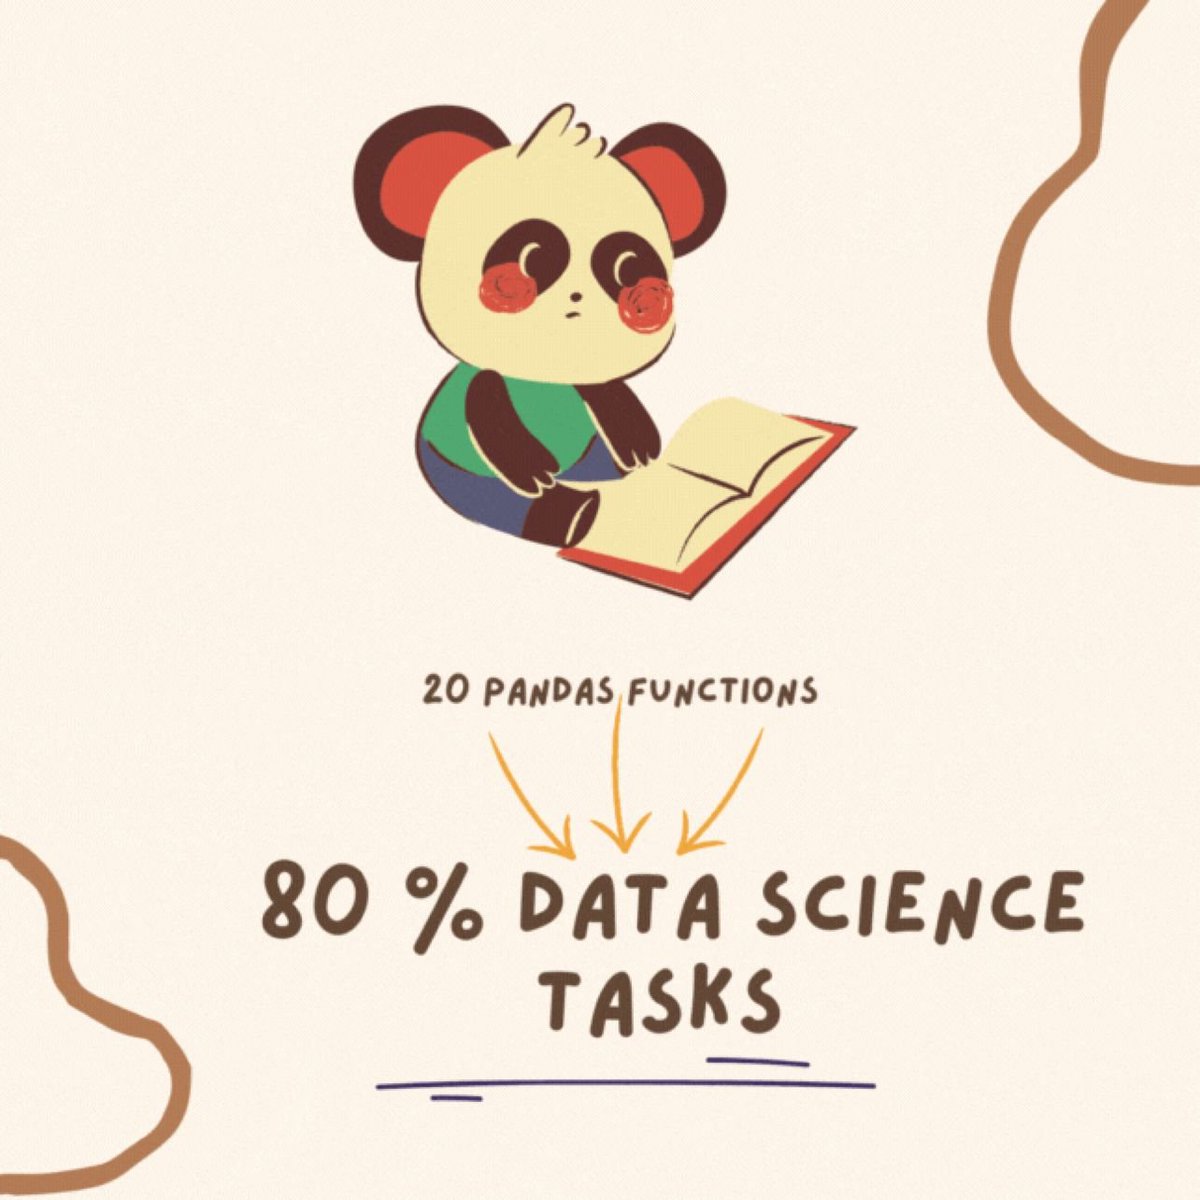 Pandas is one of the most widely used libraries in the data science community and it’s a powerful tool that can help you with data manipulation, cleaning, and analysis.#datascience #data #community #Pandas